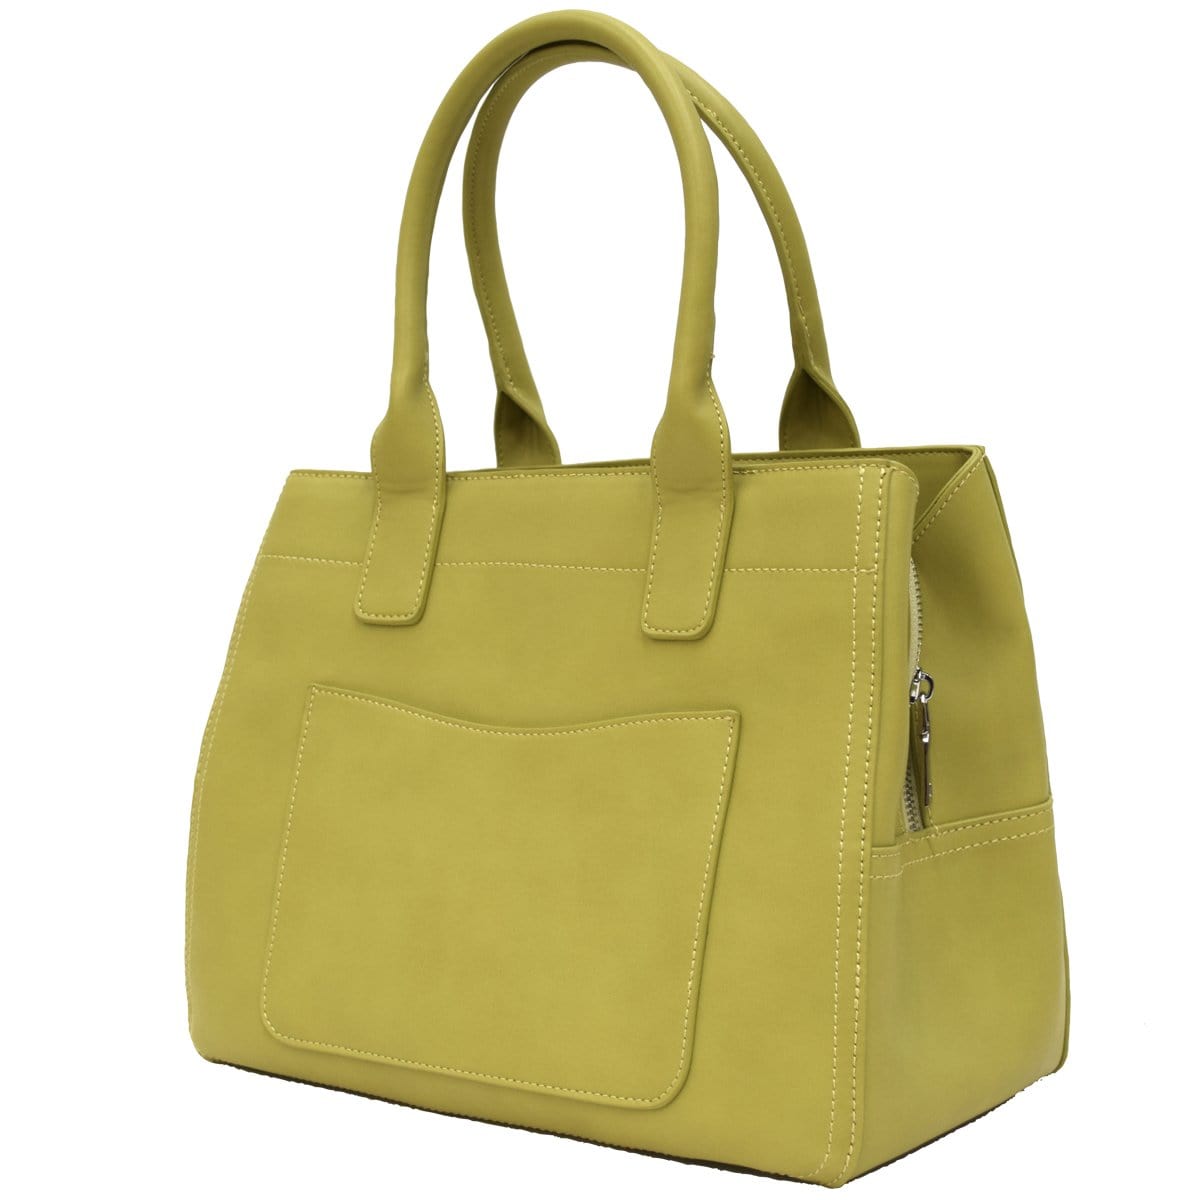 Monroe Tote - Chartreuse Leather Look